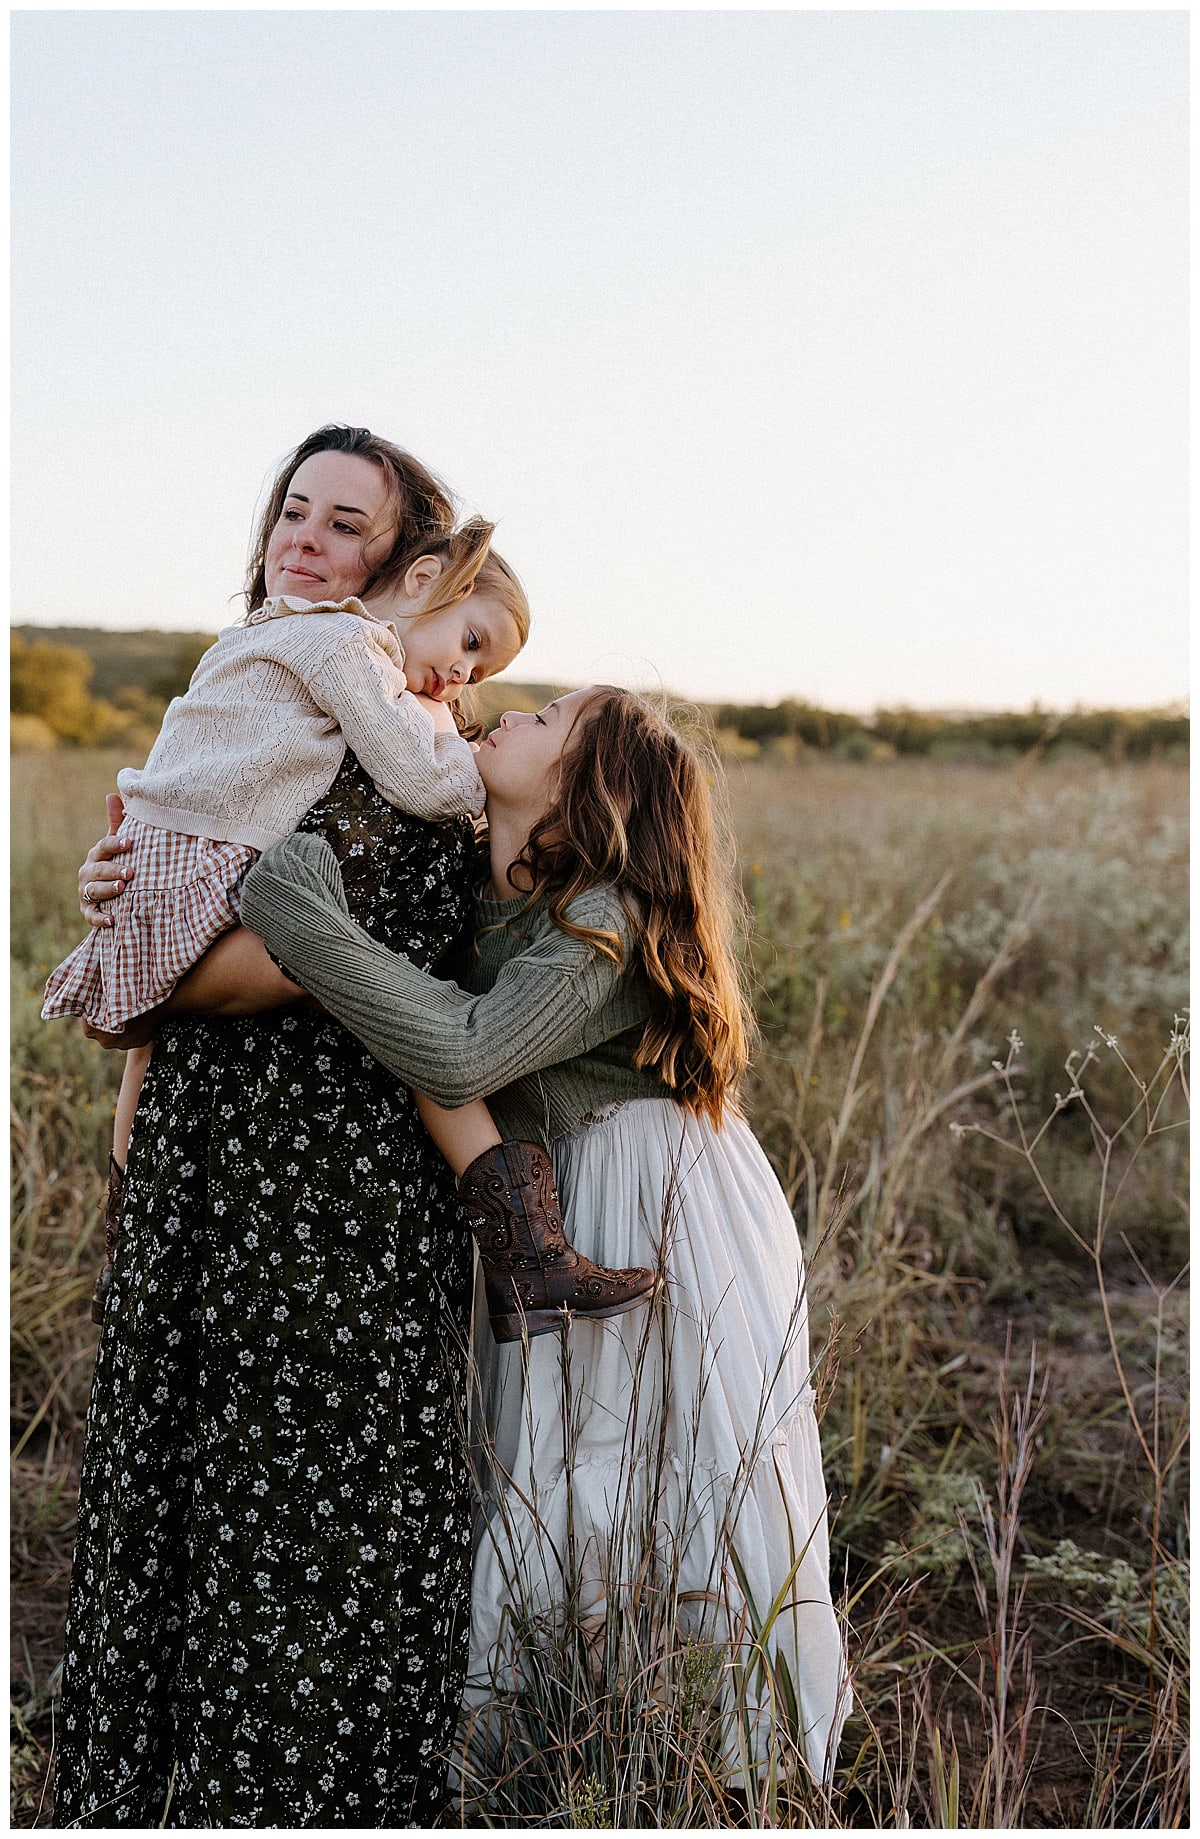 Young girls cuddle and hug their mom during their Sunrise Family Photos